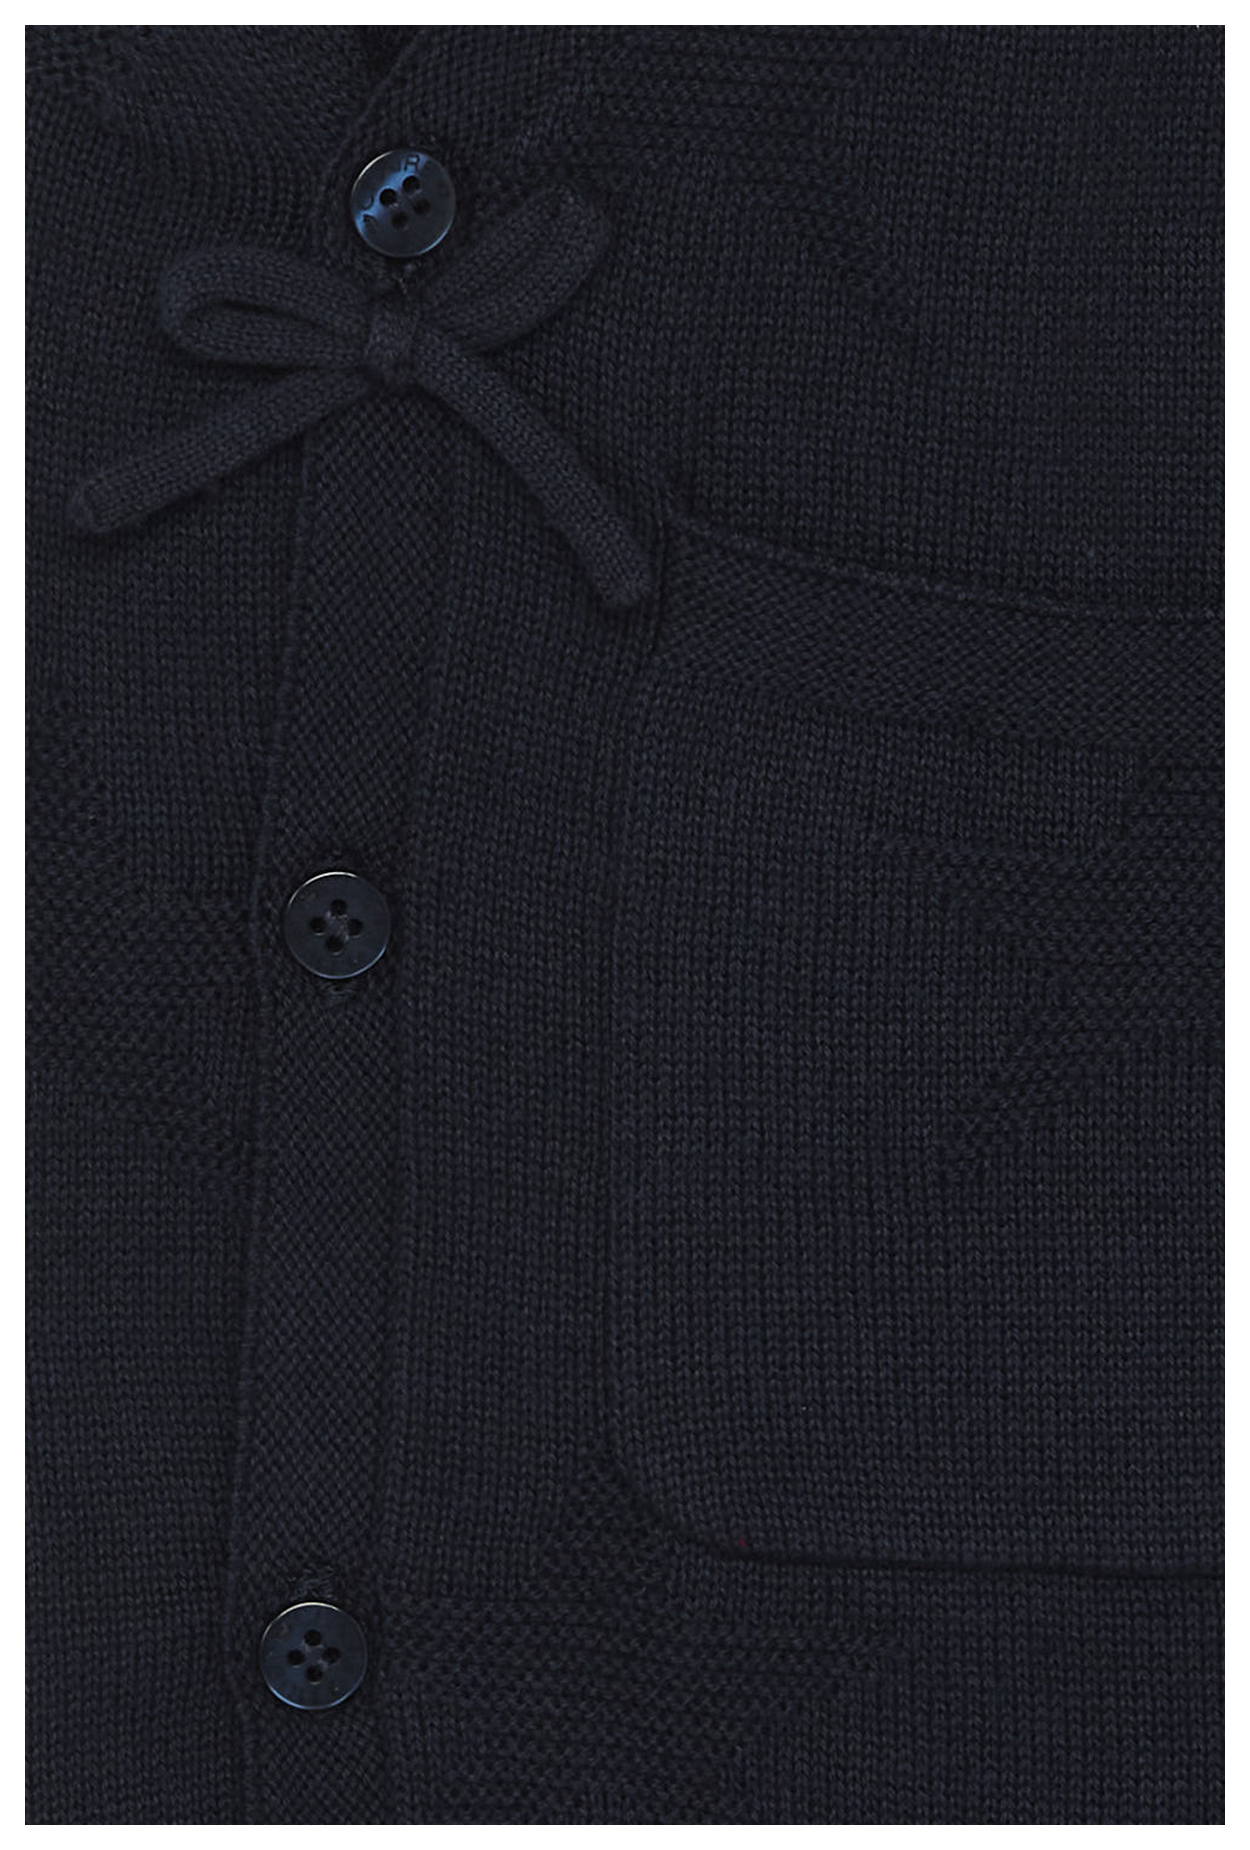 Hust & Claire Baby Jumpsuit navy